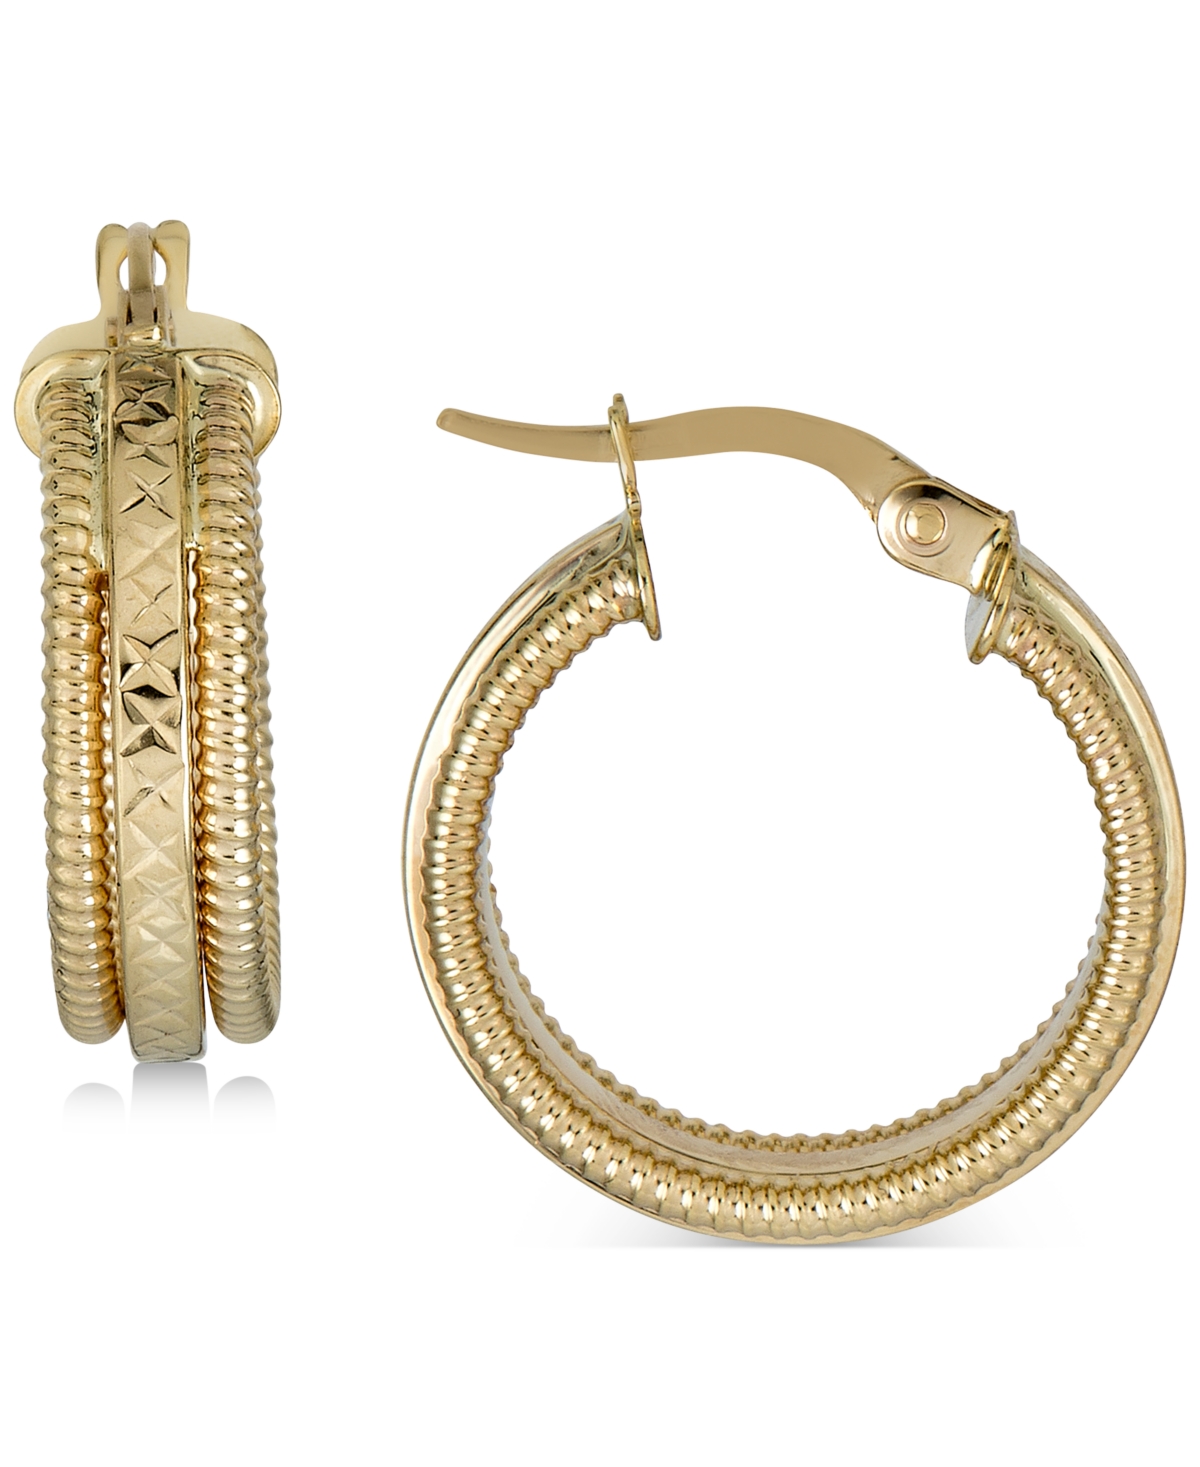 Textured Tubogas Small Hoop Earrings in 10k Gold - Yellow Gold